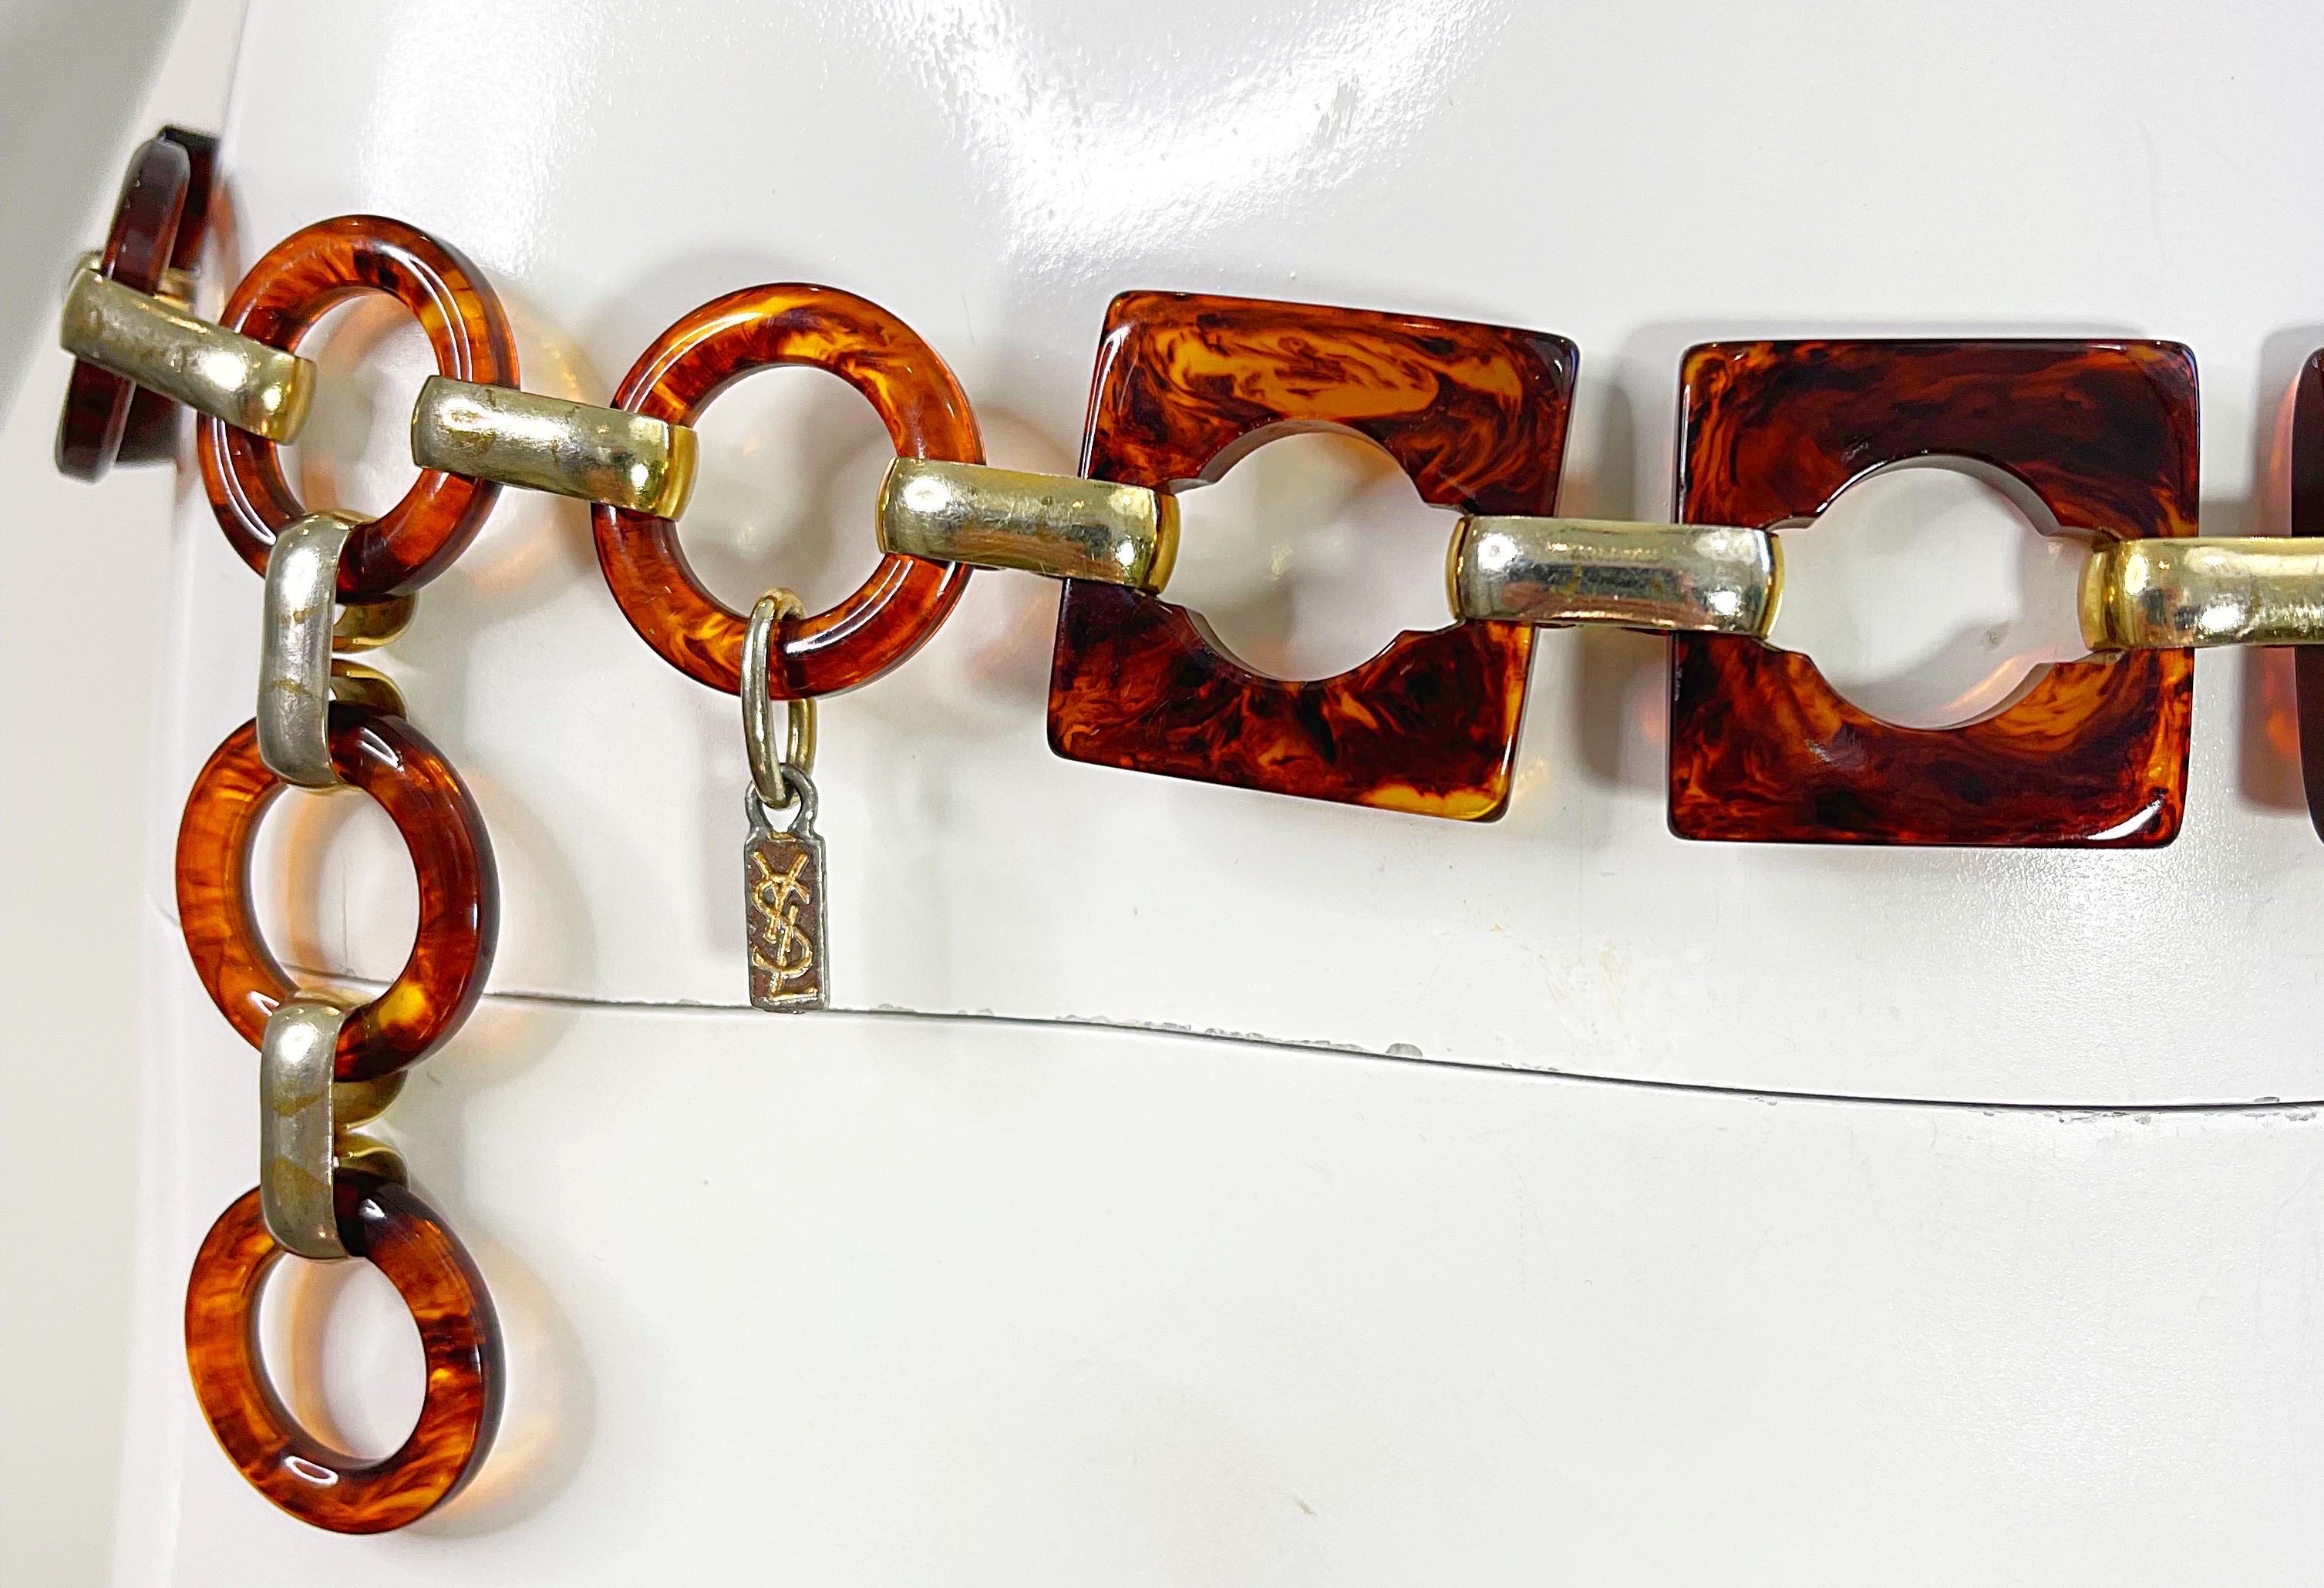 Chic vintage 70s YVES SAINT LAURENT YSL tortoise lucite link belt OR necklace ! Features square and circle tortoise links throughout. Throw over a blouse or dress. Can also be worn as a choker or strand necklace. 
In great condition 
Made in